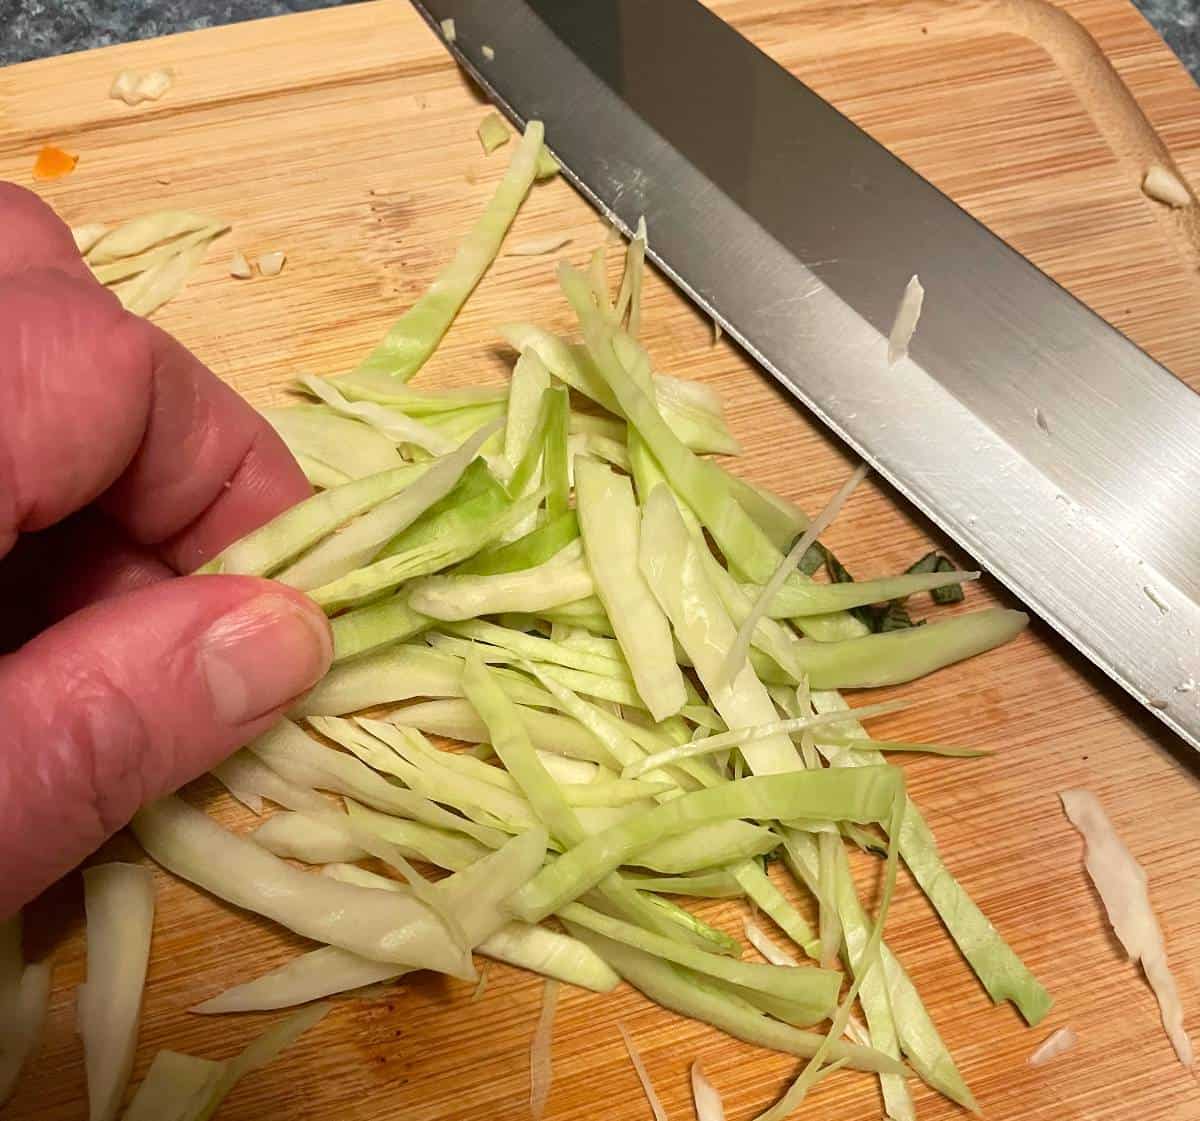 chopping green cabbage on a wooden cutting board.